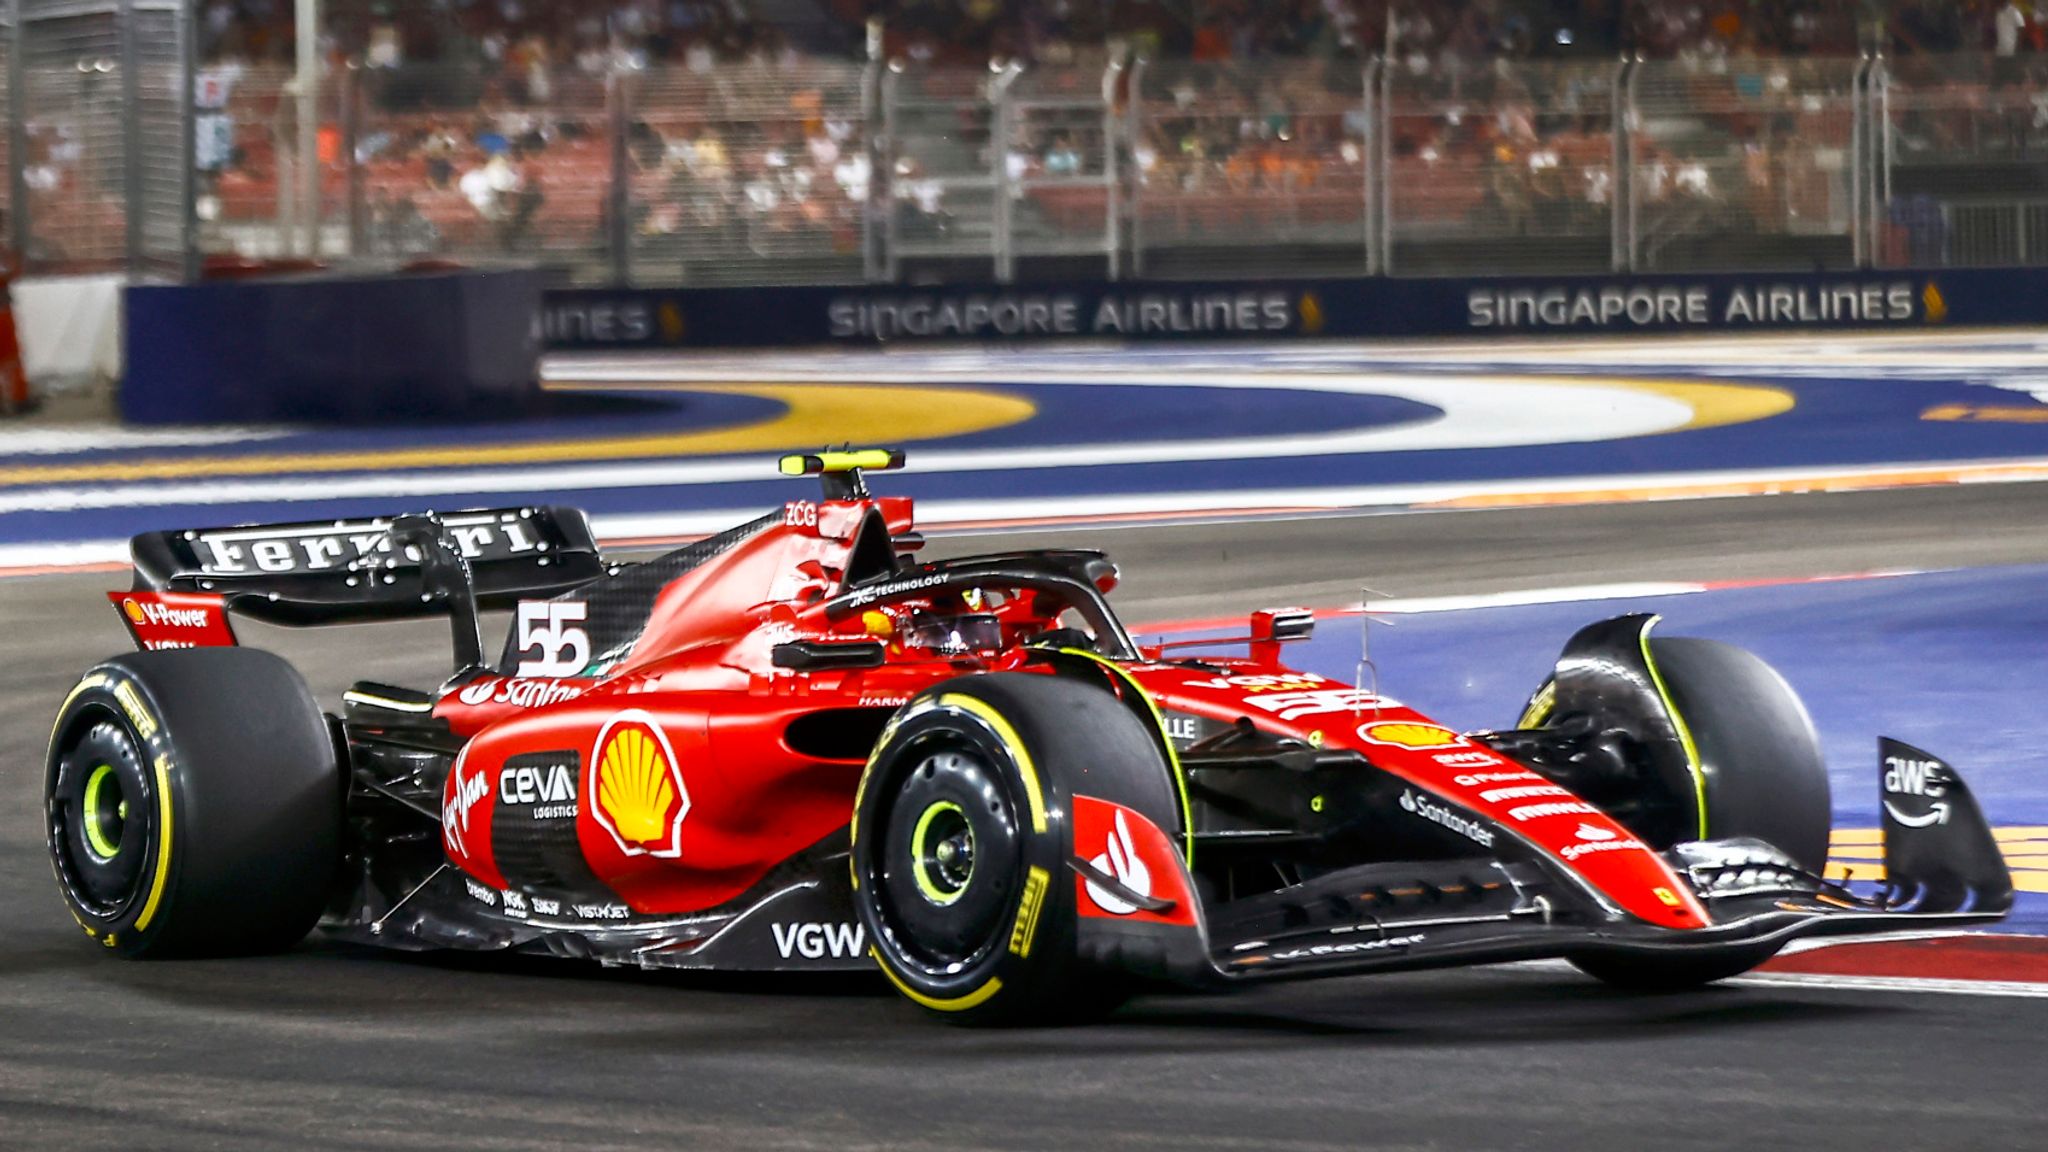 Singapore GP, Practice Two Carlos Sainz leads another Ferrari 1-2 while Red Bull off the pace F1 News